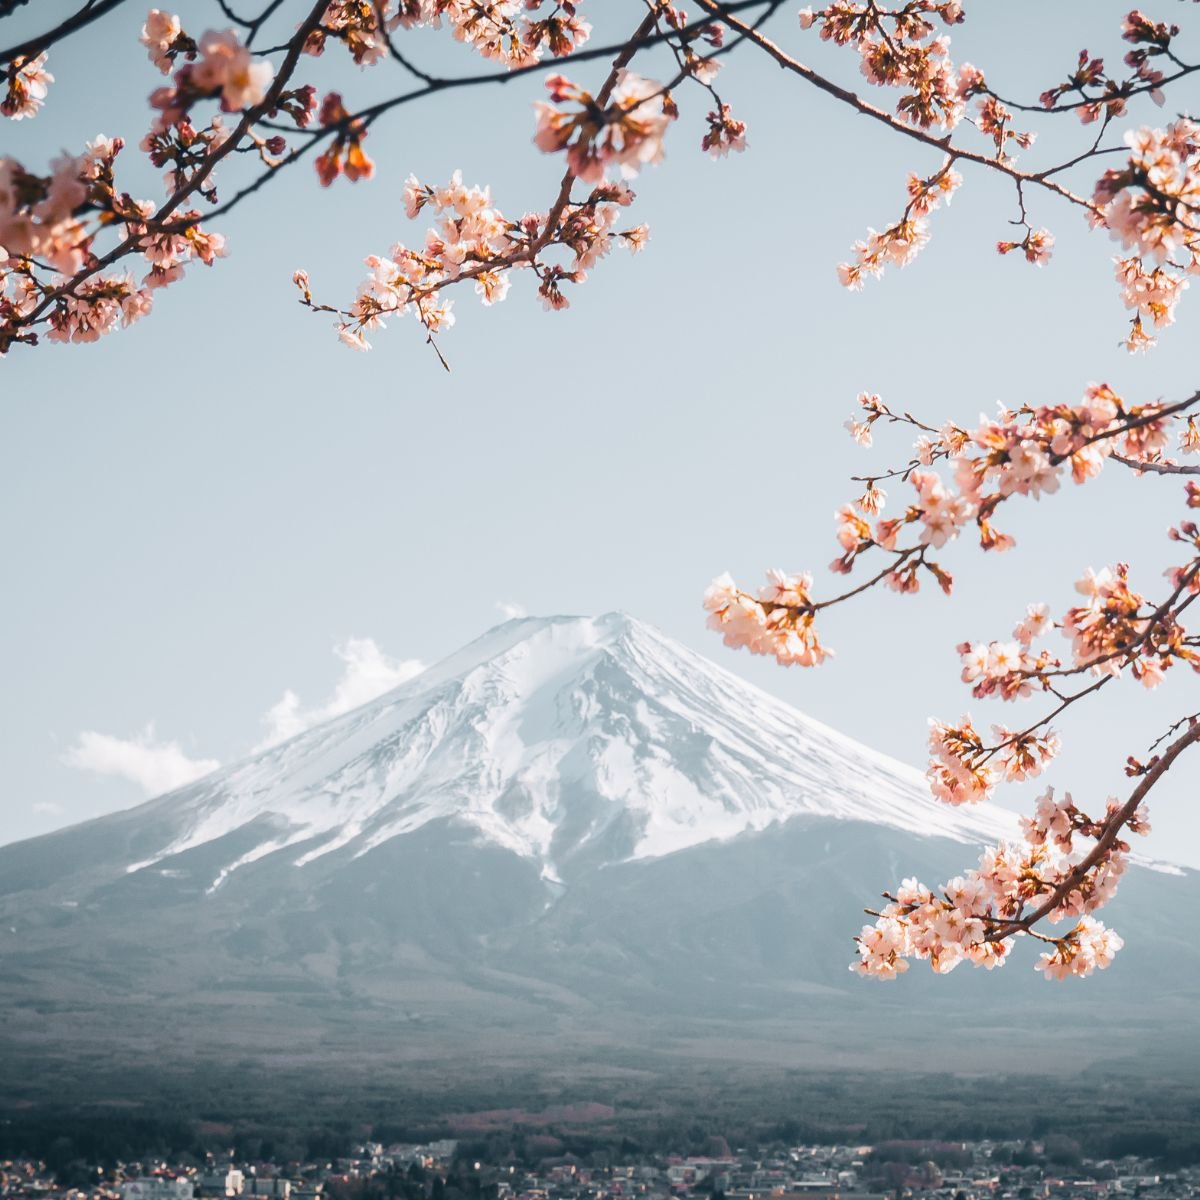 Japanese cherry blossoms in front of a mountain